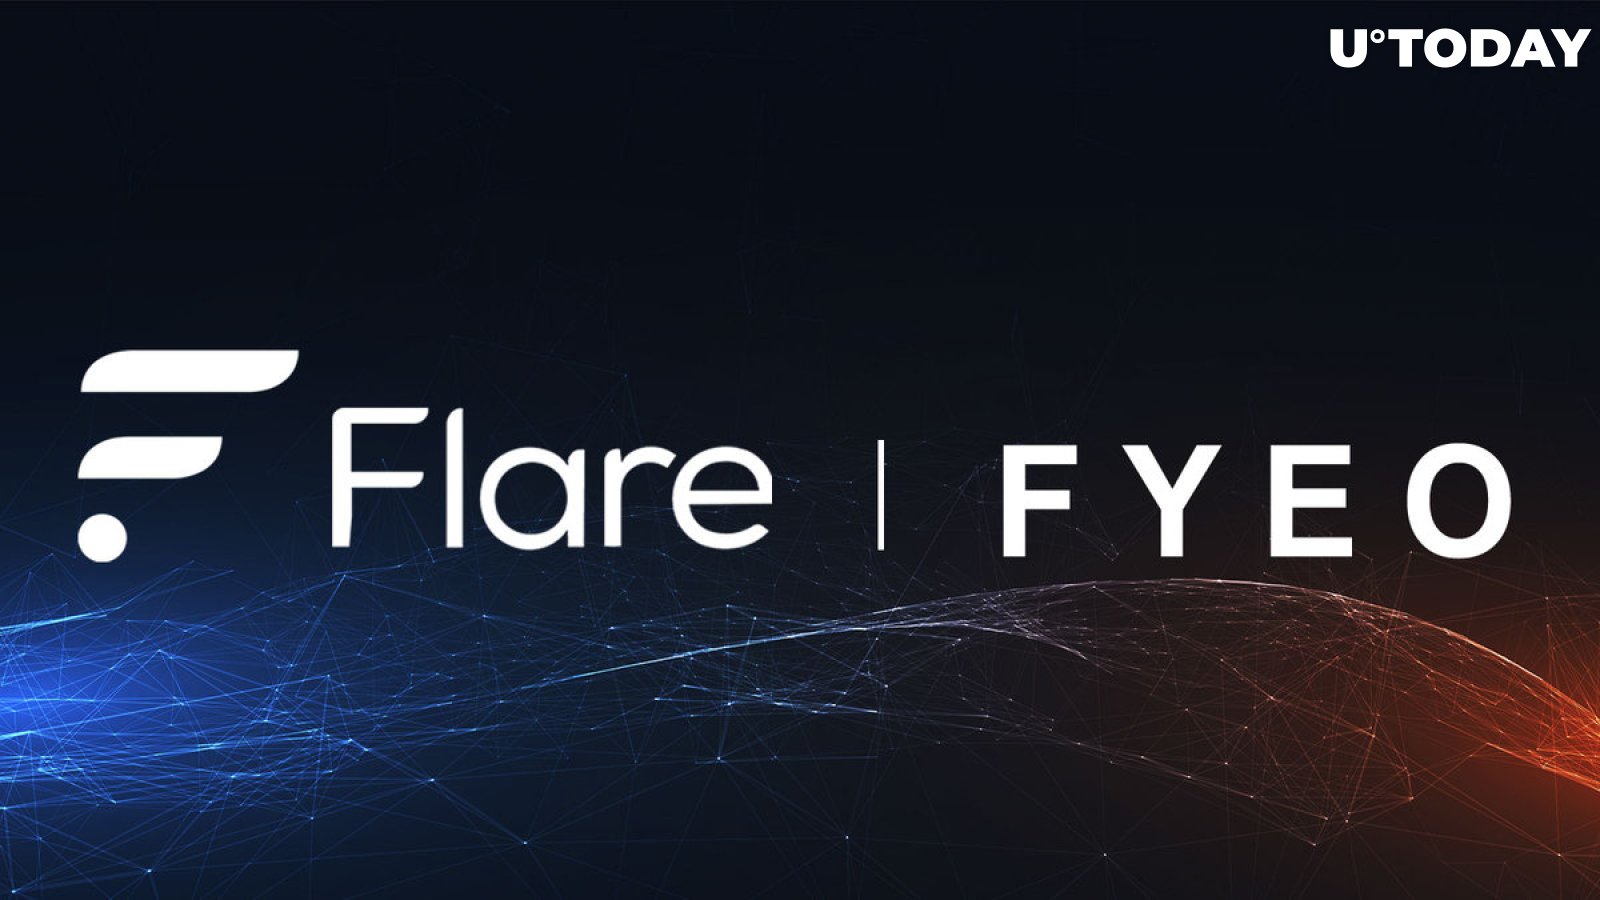 Flare (FLR) Partners with Security Expert FYEO for Audits